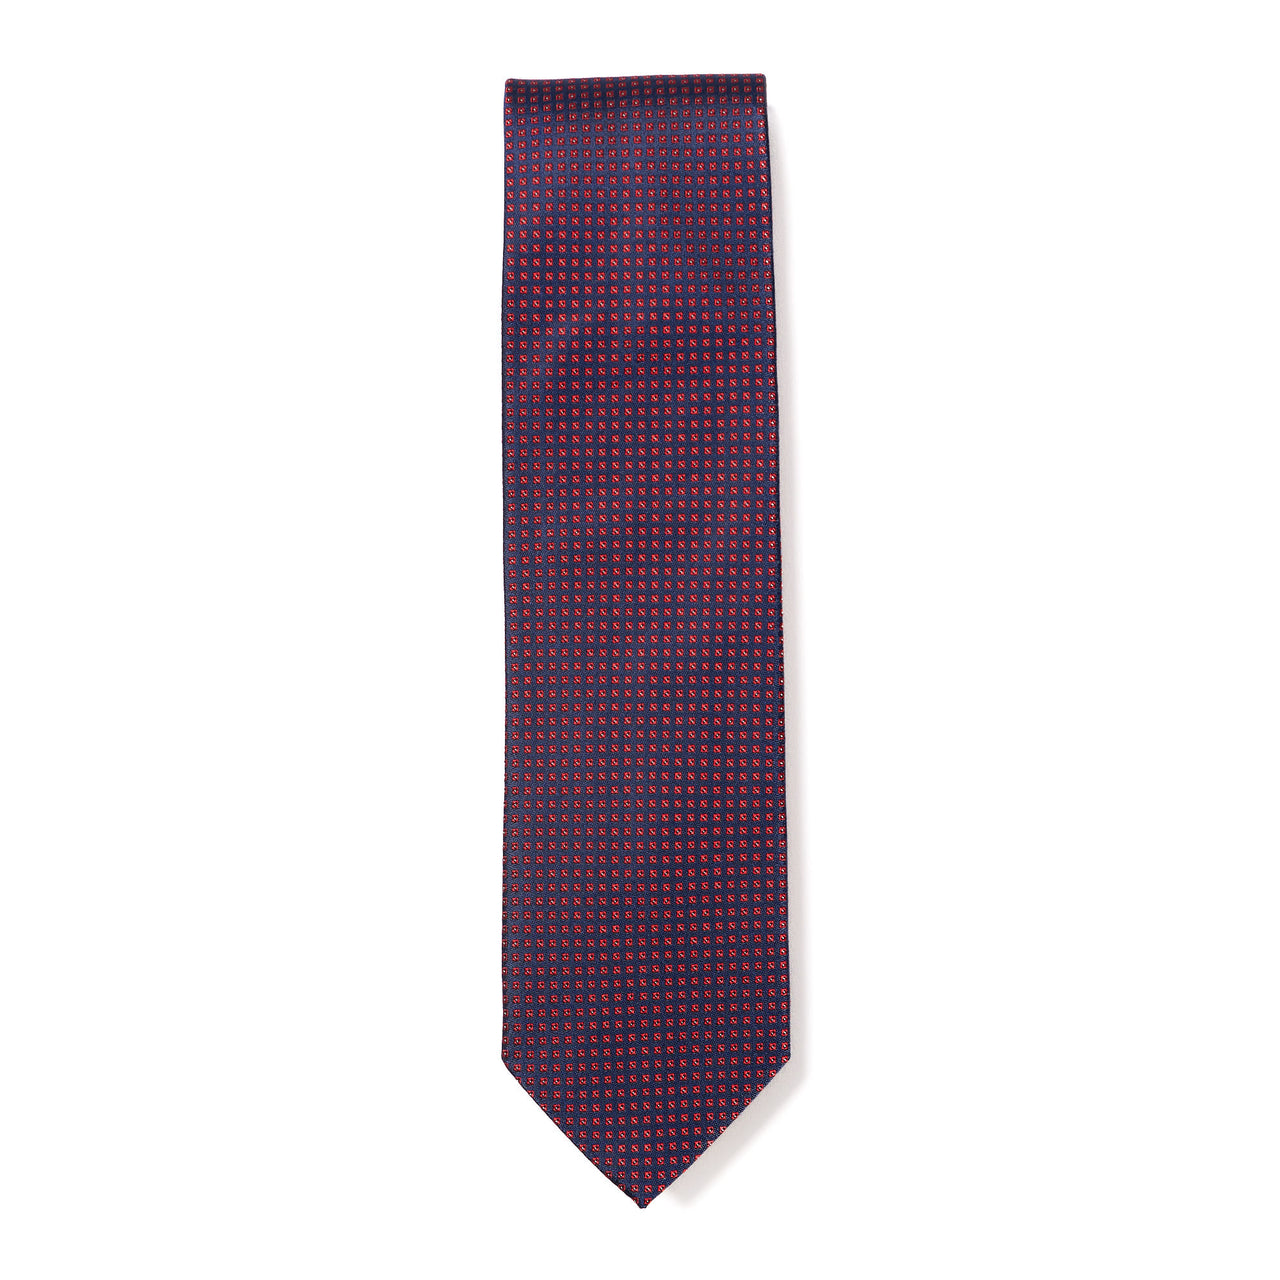 HENRY SARTORIAL X CANTINI Woven Pattern Tie NAVY/RED